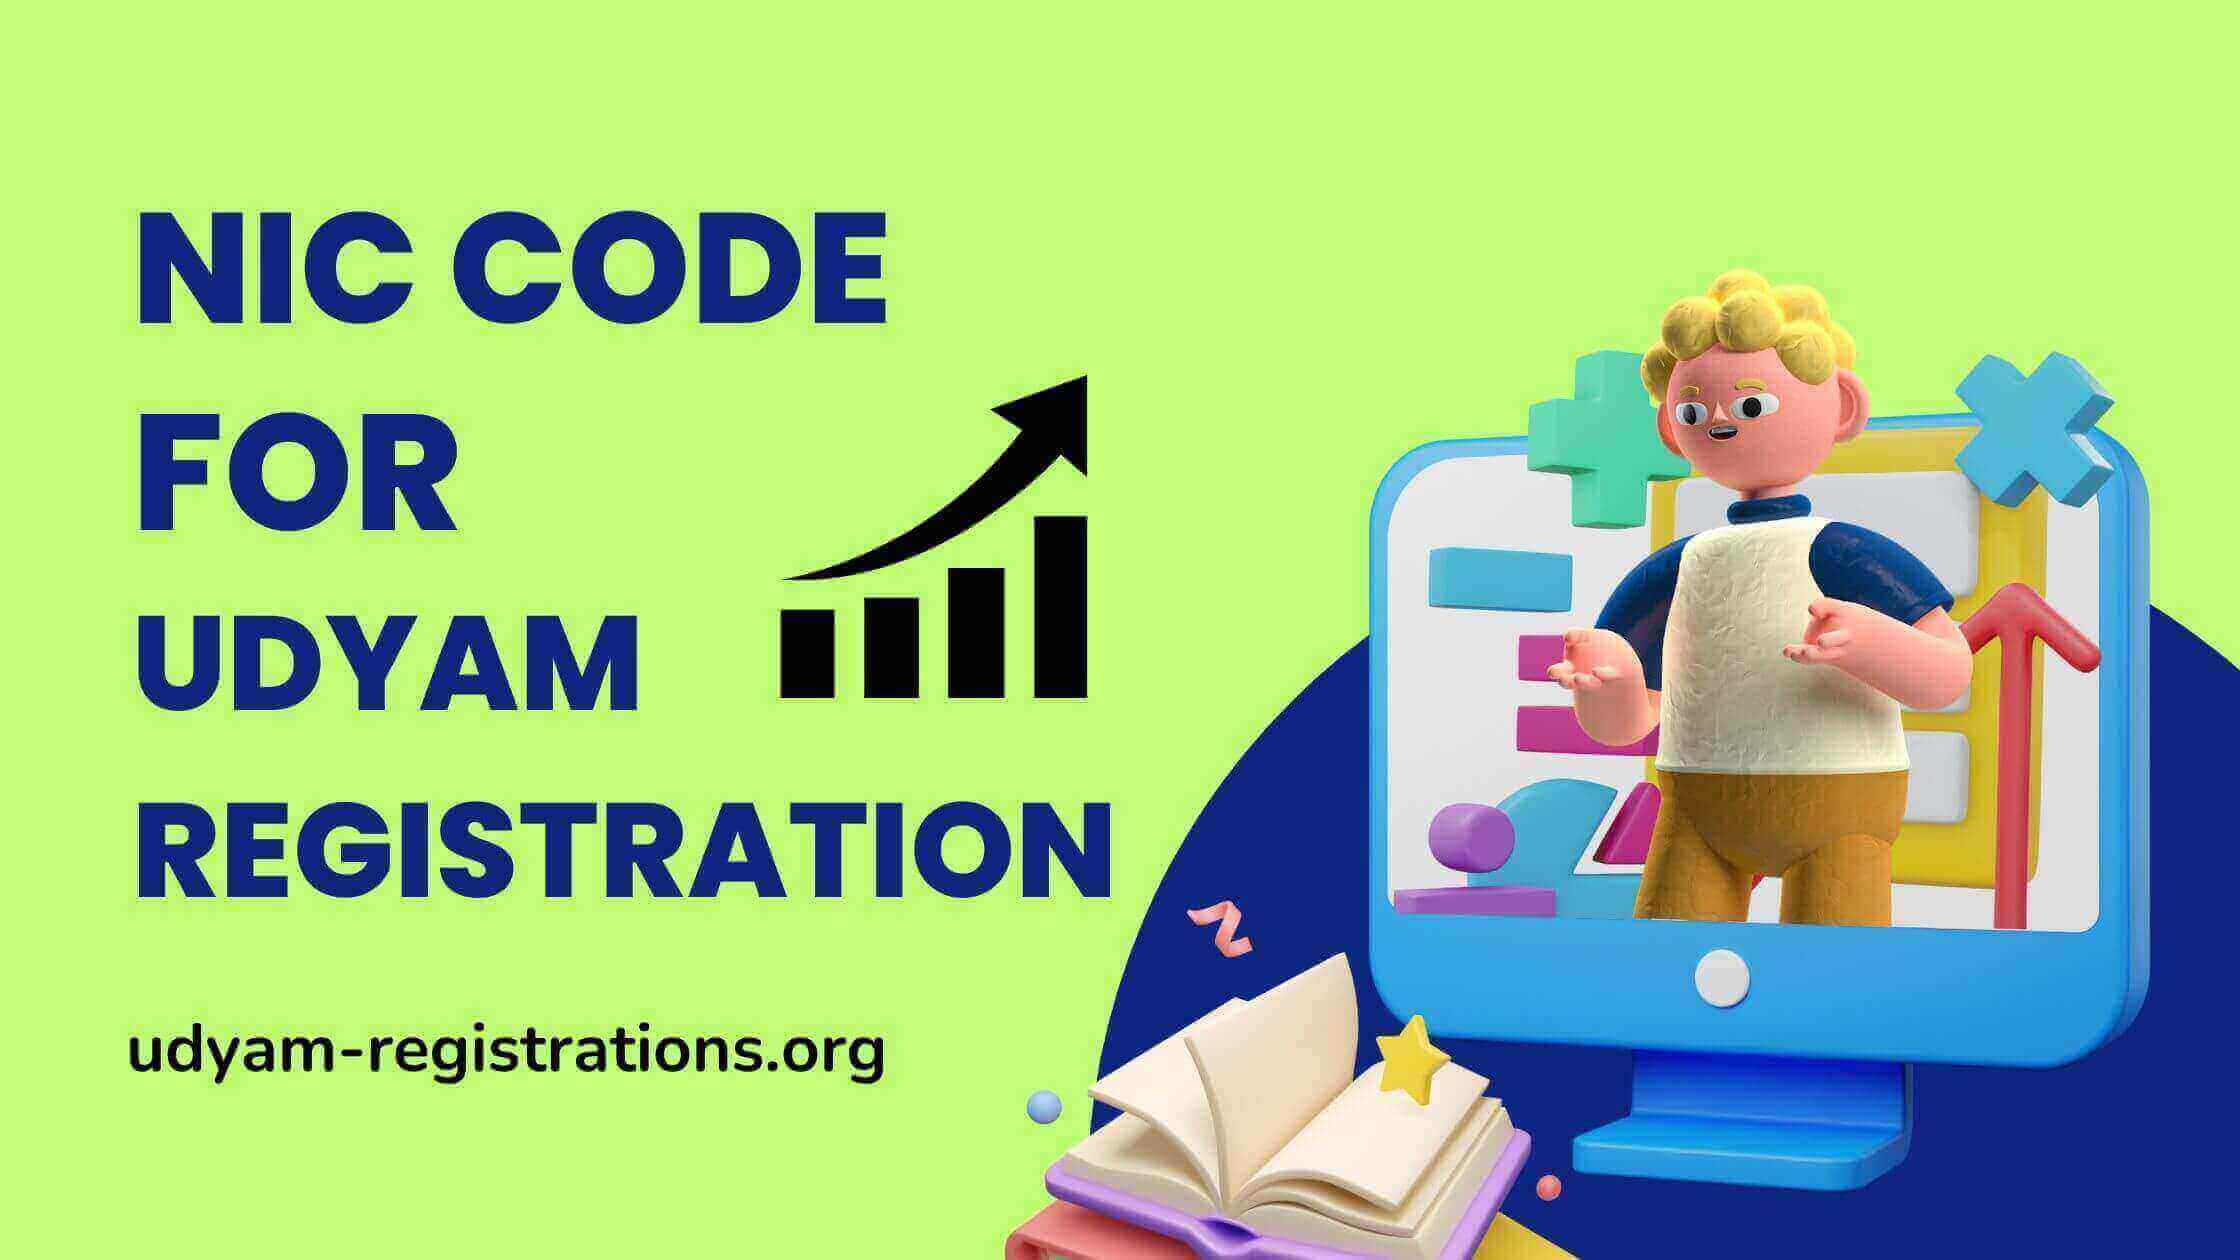 NIC Code - National Industrial Classification Code For Udyam registration